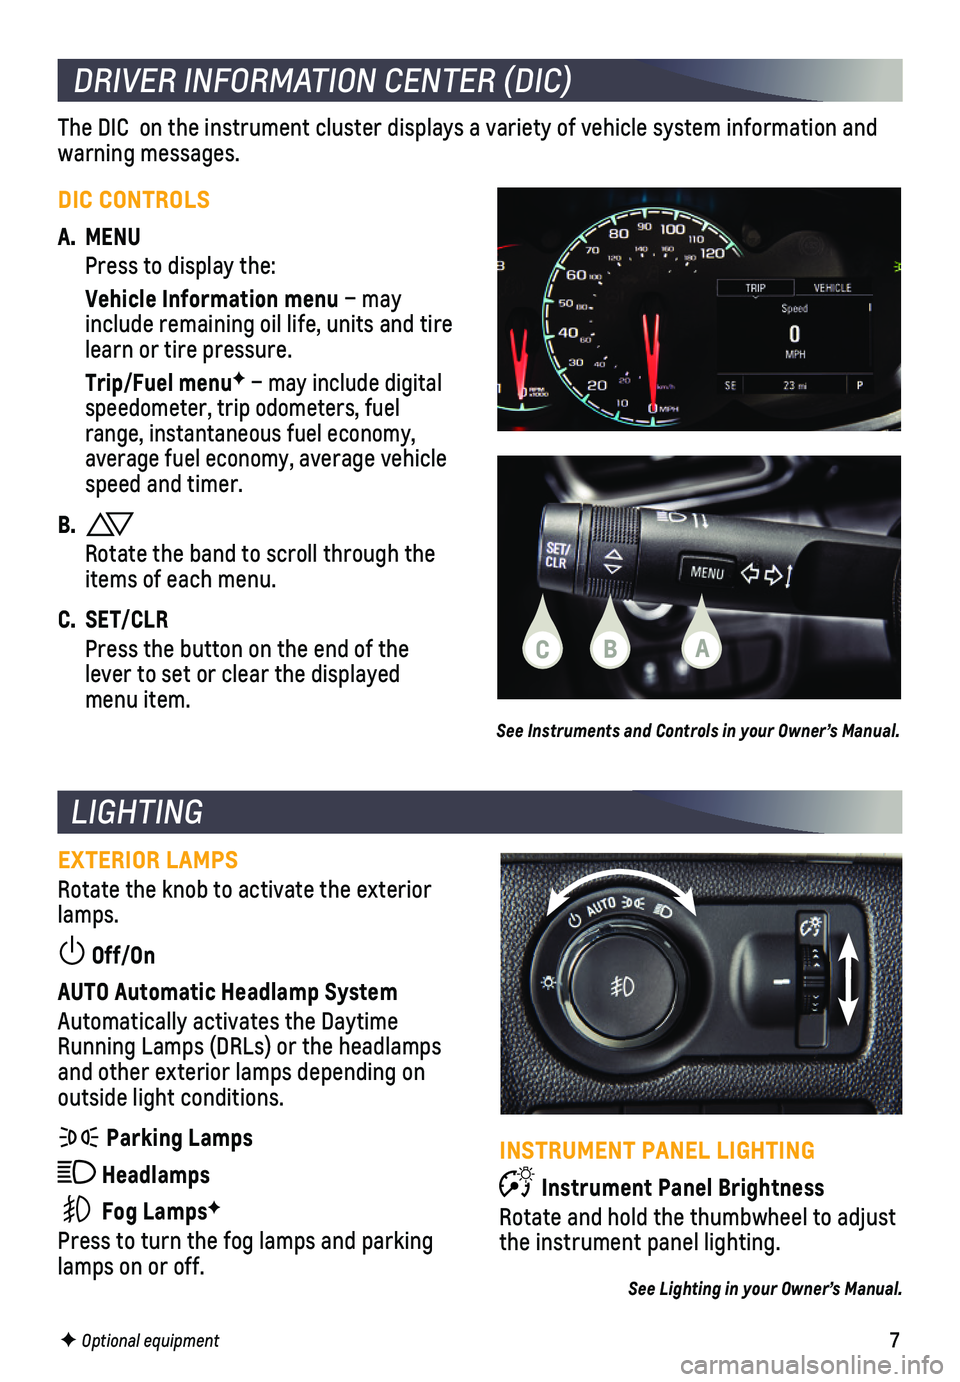 CHEVROLET SPARK 2021  Get To Know Guide 7
LIGHTING
EXTERIOR LAMPS
Rotate the knob to activate the exterior lamps.
 Off/On 
AUTO Automatic Headlamp System
Automatically activates the Daytime Running Lamps (DRLs) or the headlamps and other ex